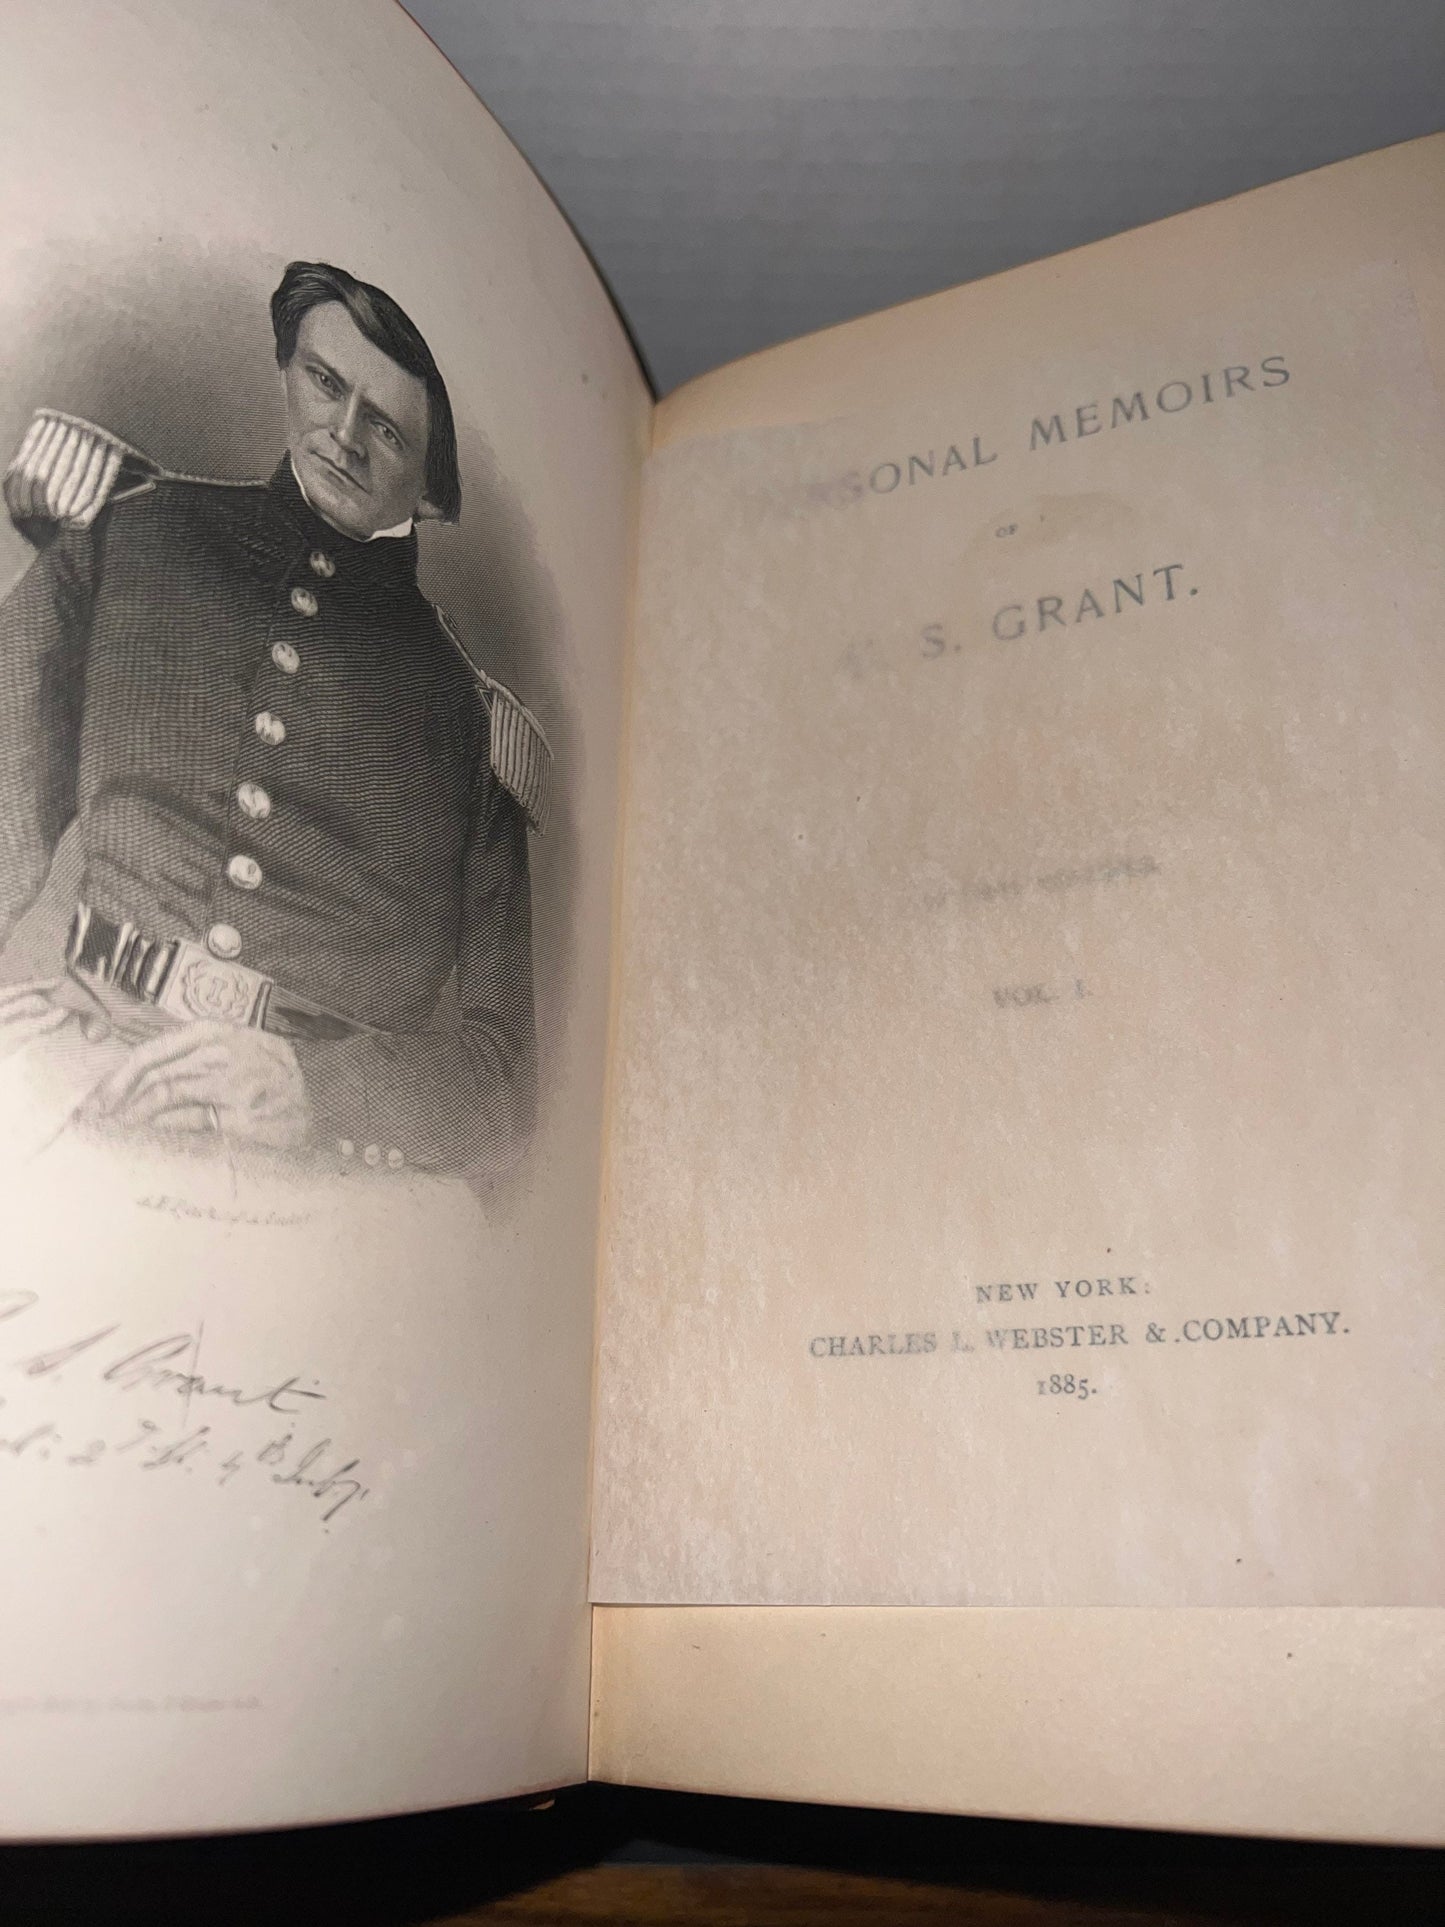 Antique 1885 first edition Personal memoirs of Ulysses s grant 2 volume history military